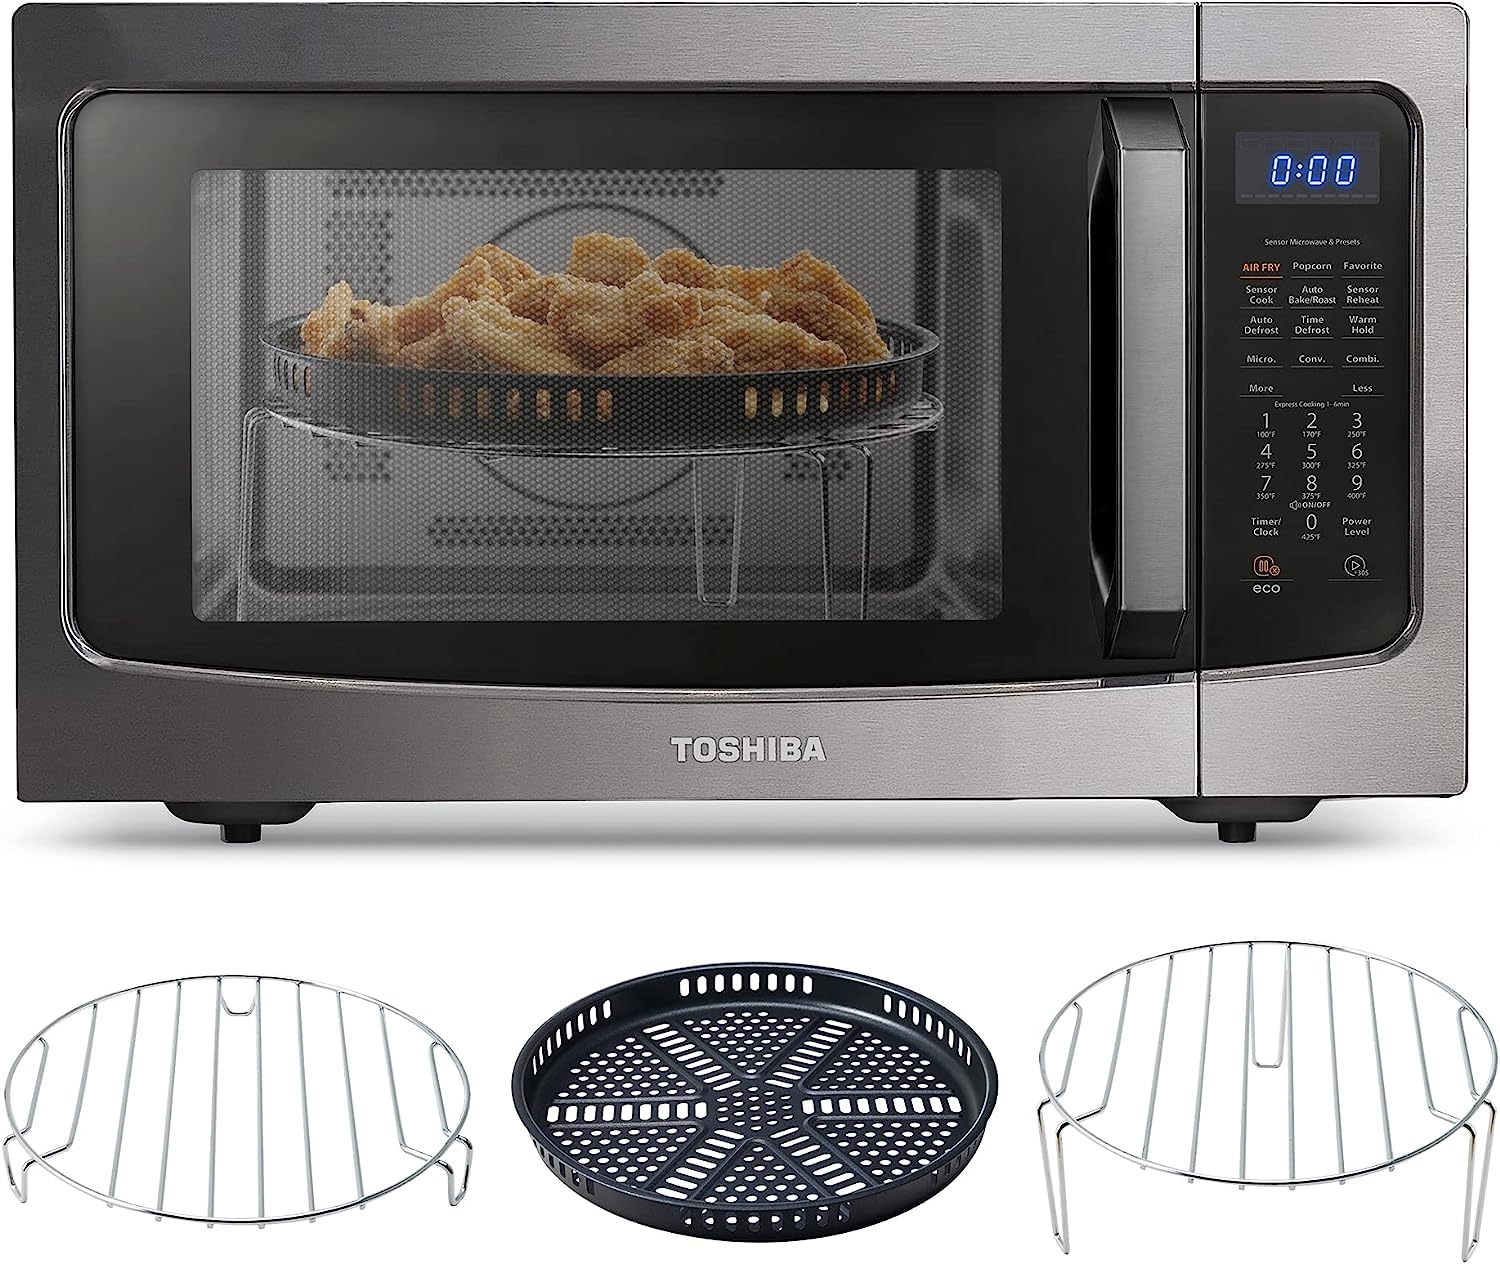 Best Microwave Convection Oven for 2023 | DeviceDaily.com